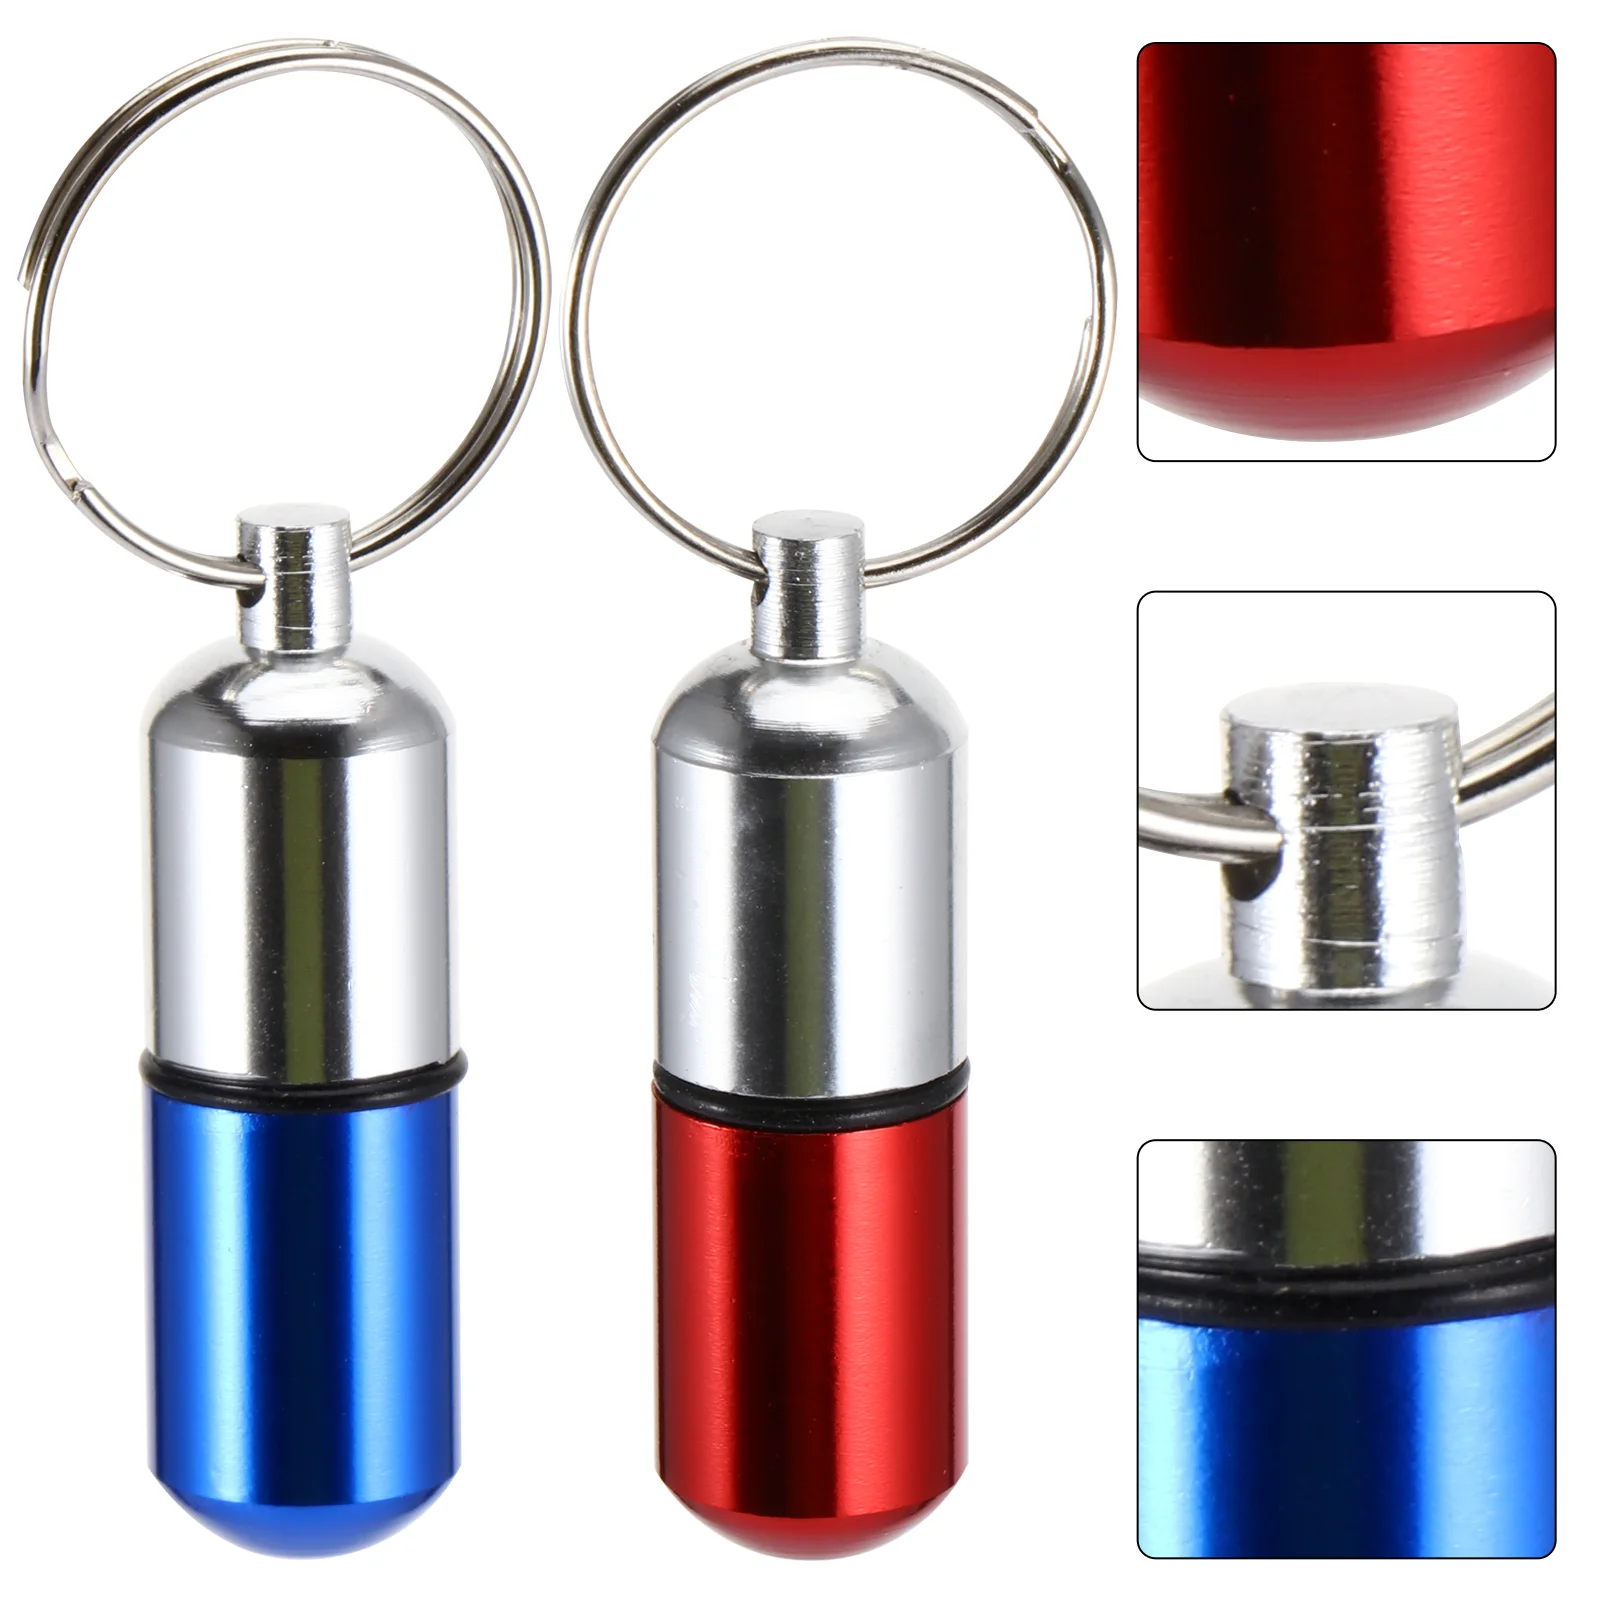 

Box Case Keychain Holder Container Organizer Mini Travel Portable Oil Fob Vitamin Storage Pocket Planner Carrying Daily